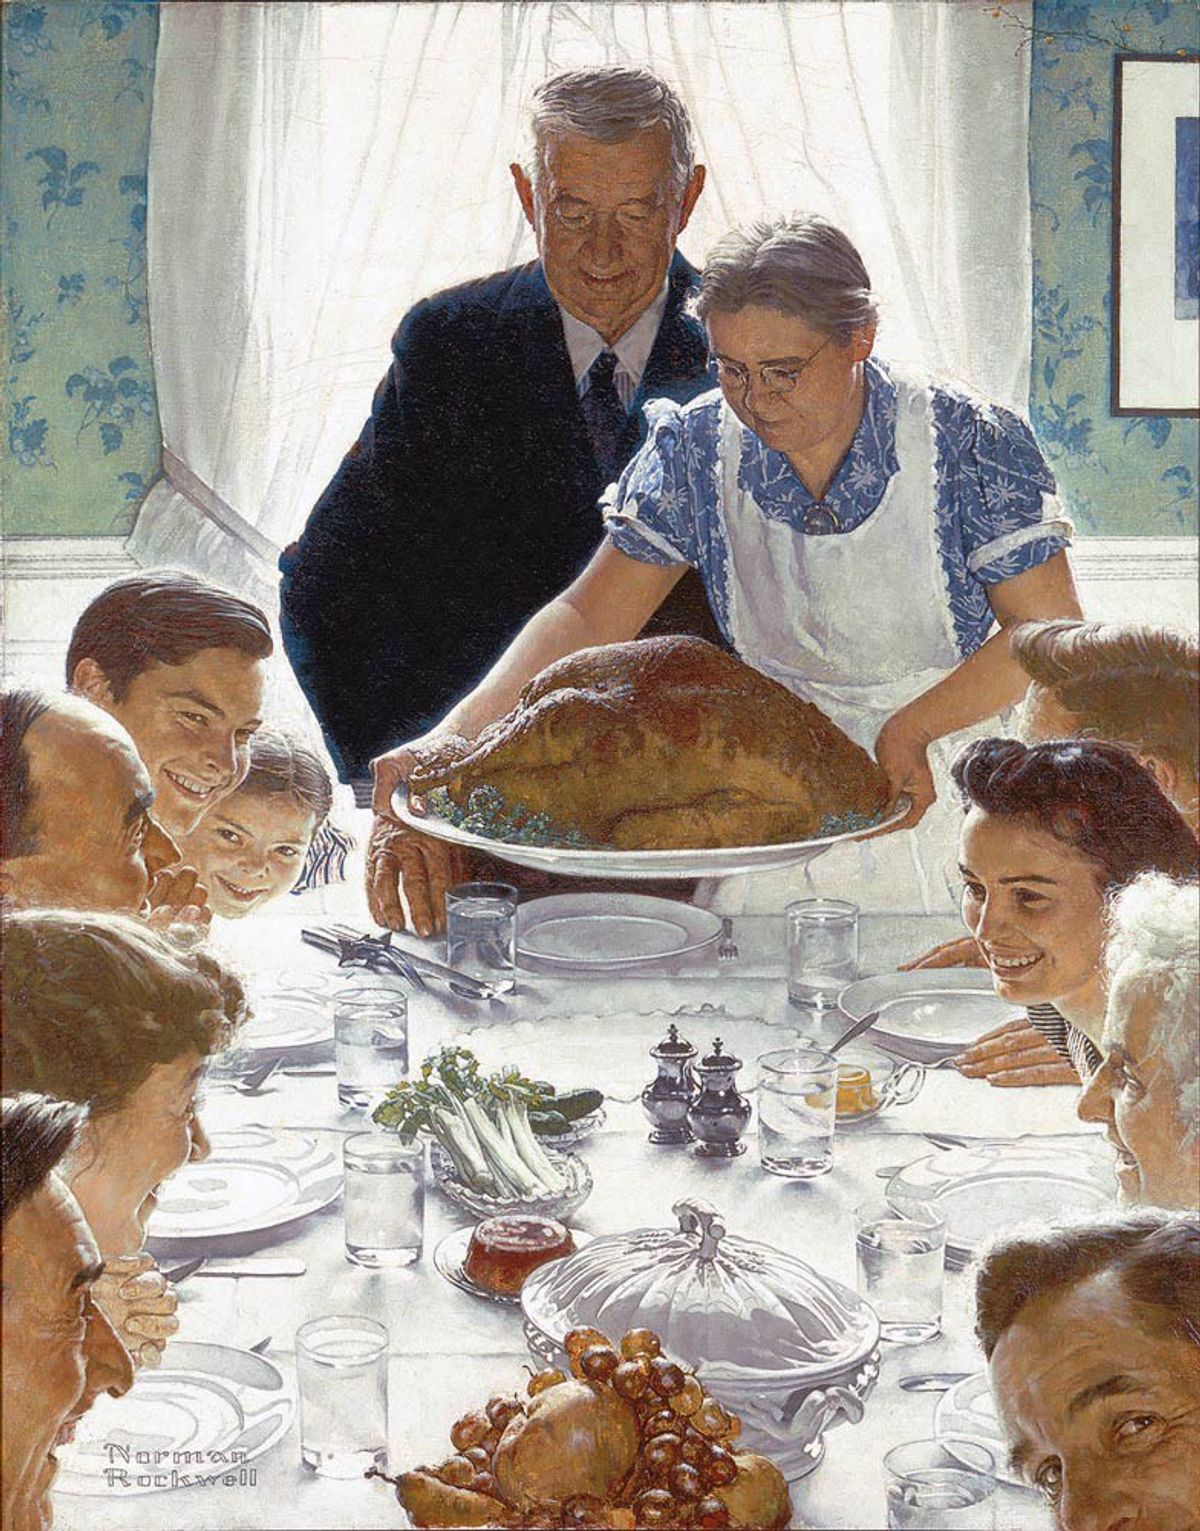 So Who Even Remembers Thanksgiving?